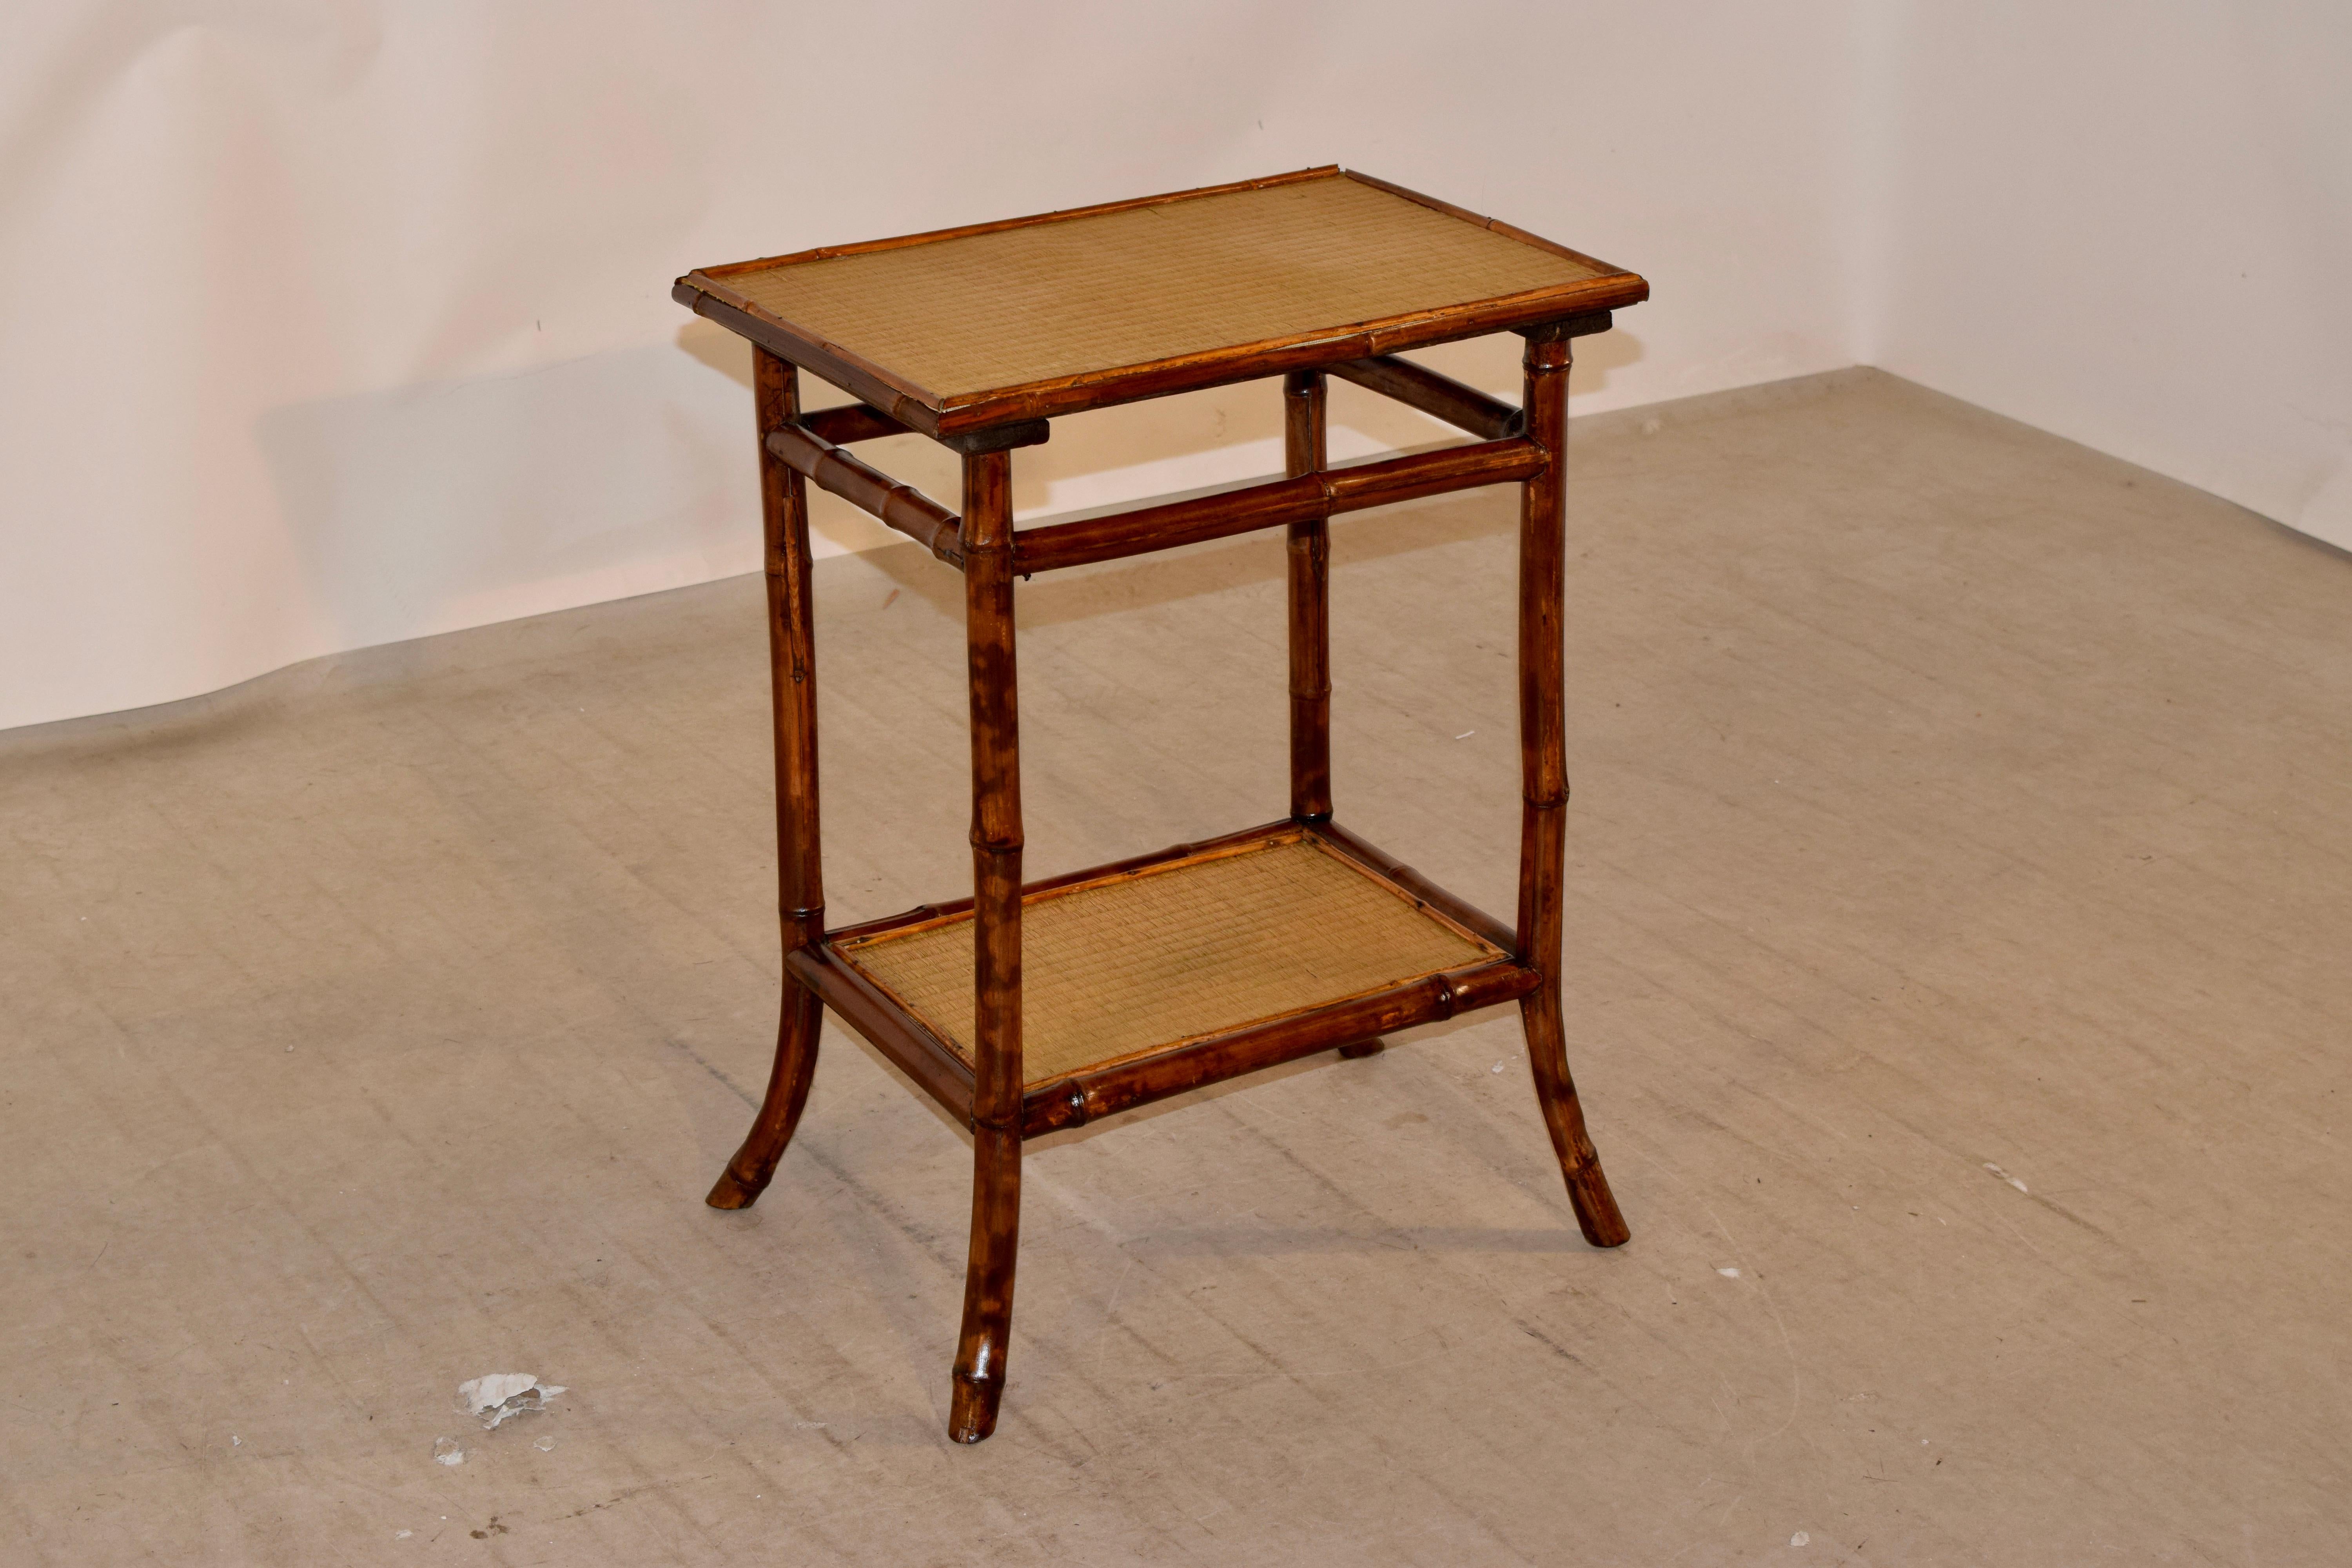 19th century French bamboo table with rush covered top and lower shelf. The top has an applied molding and follows down to stretchers, over a lower shelf, also with applied molding. Lovely splayed legs.